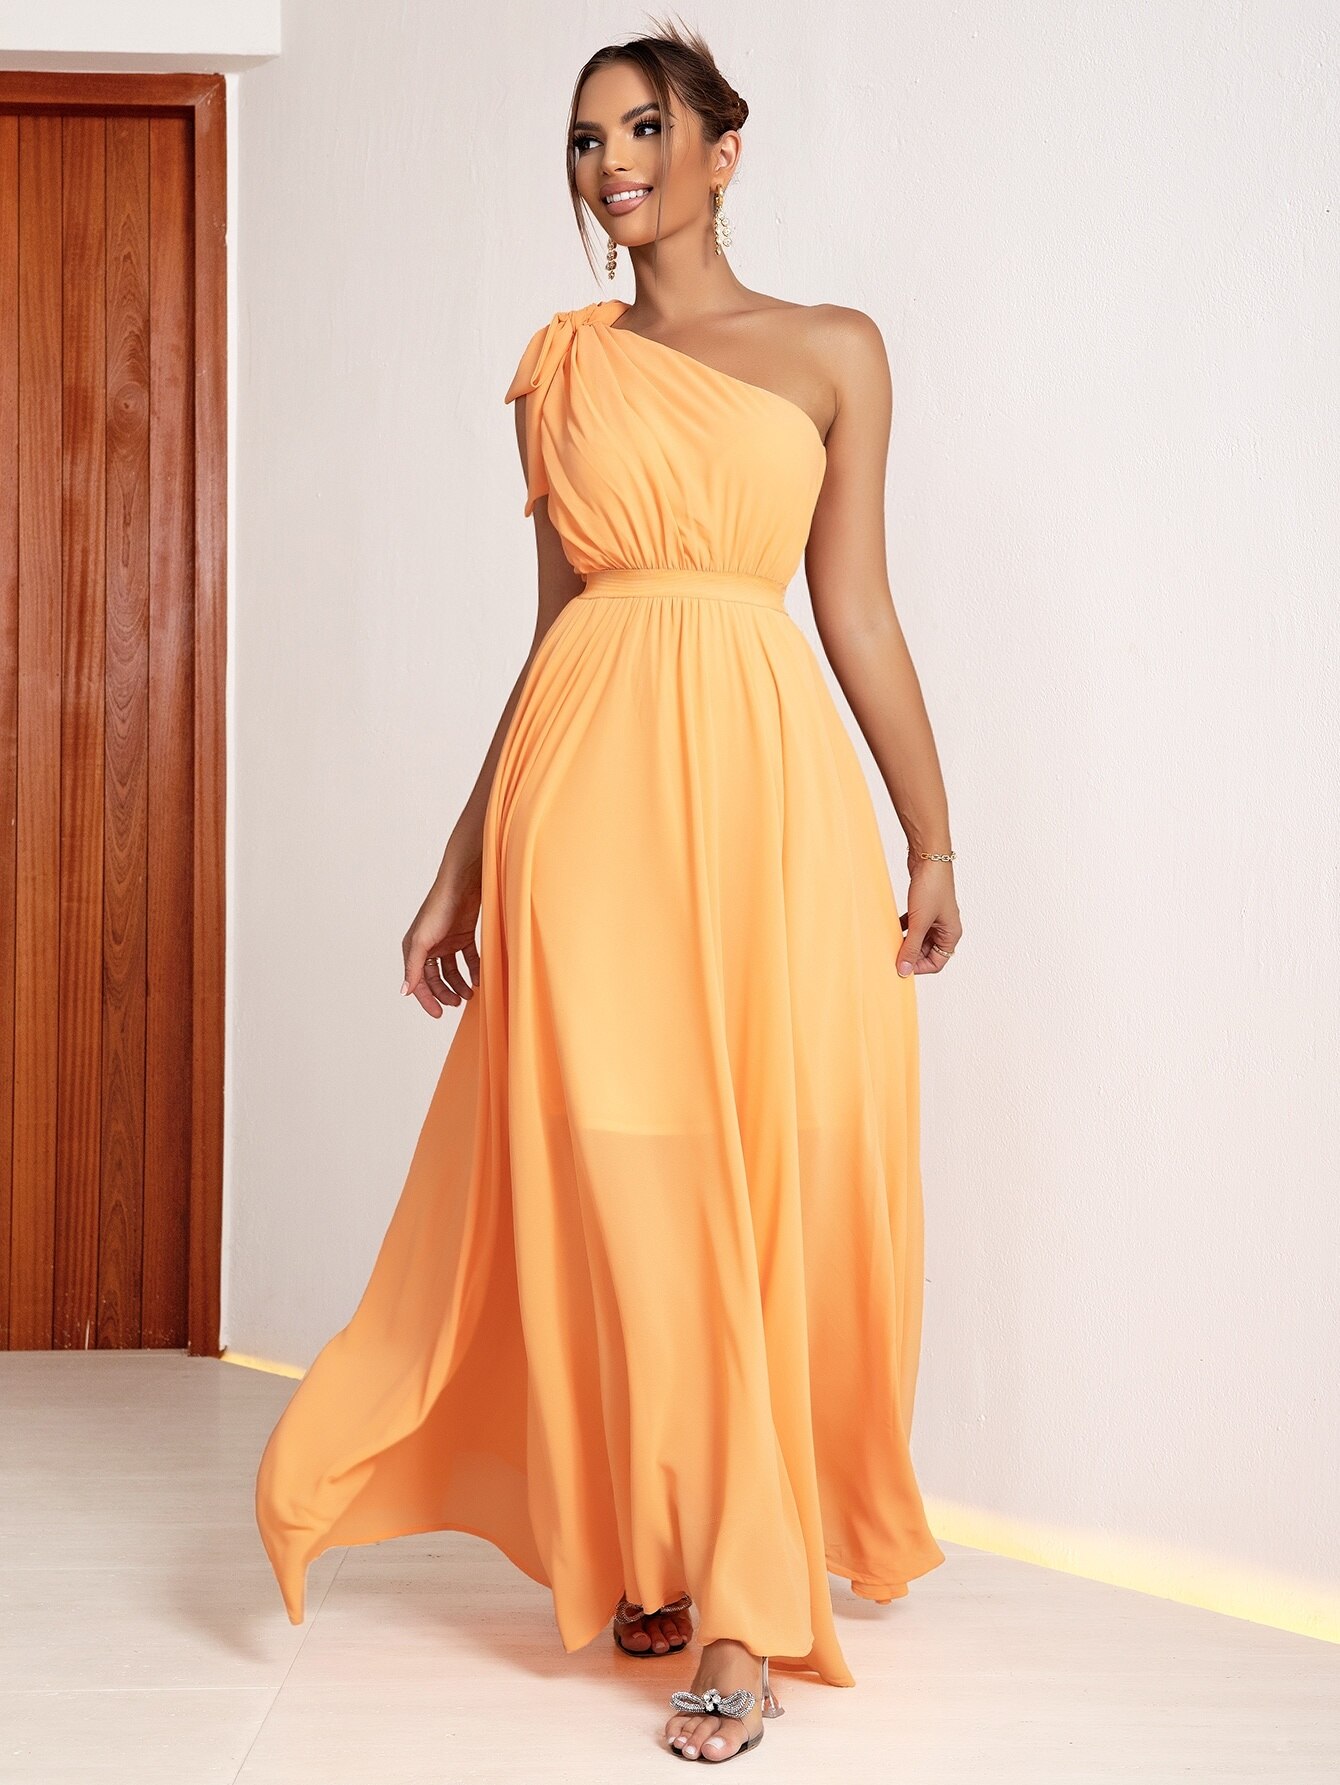 Yissang-Tie-One-Shoulder-Maxi-Dress-4